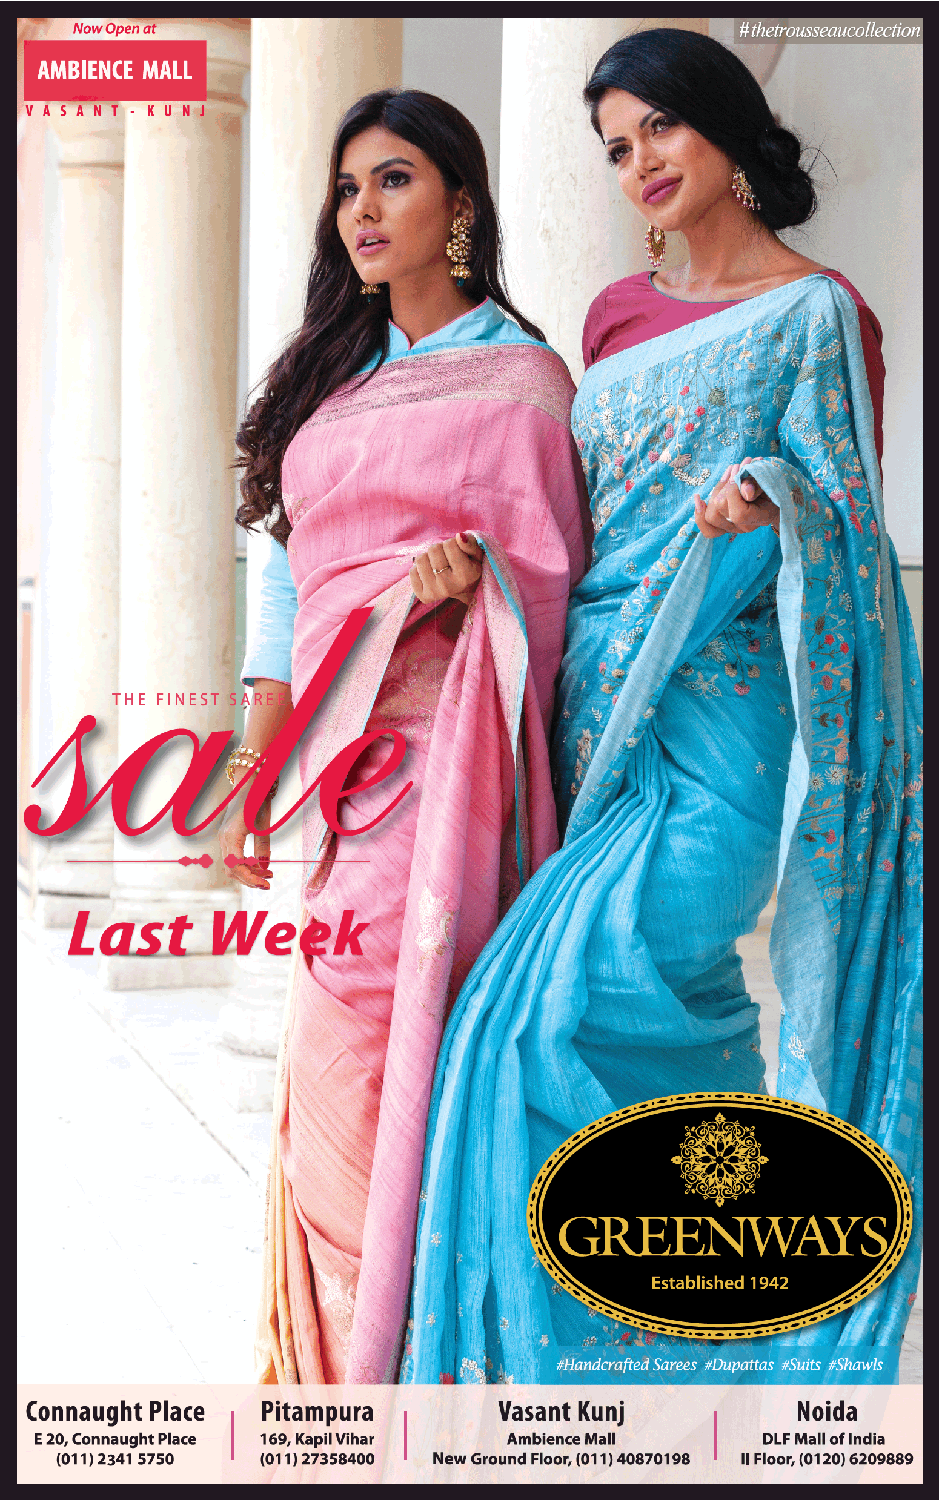 ambience-mall-the-finest-saree-sale-ad-delhi-times-09-02-2019.png